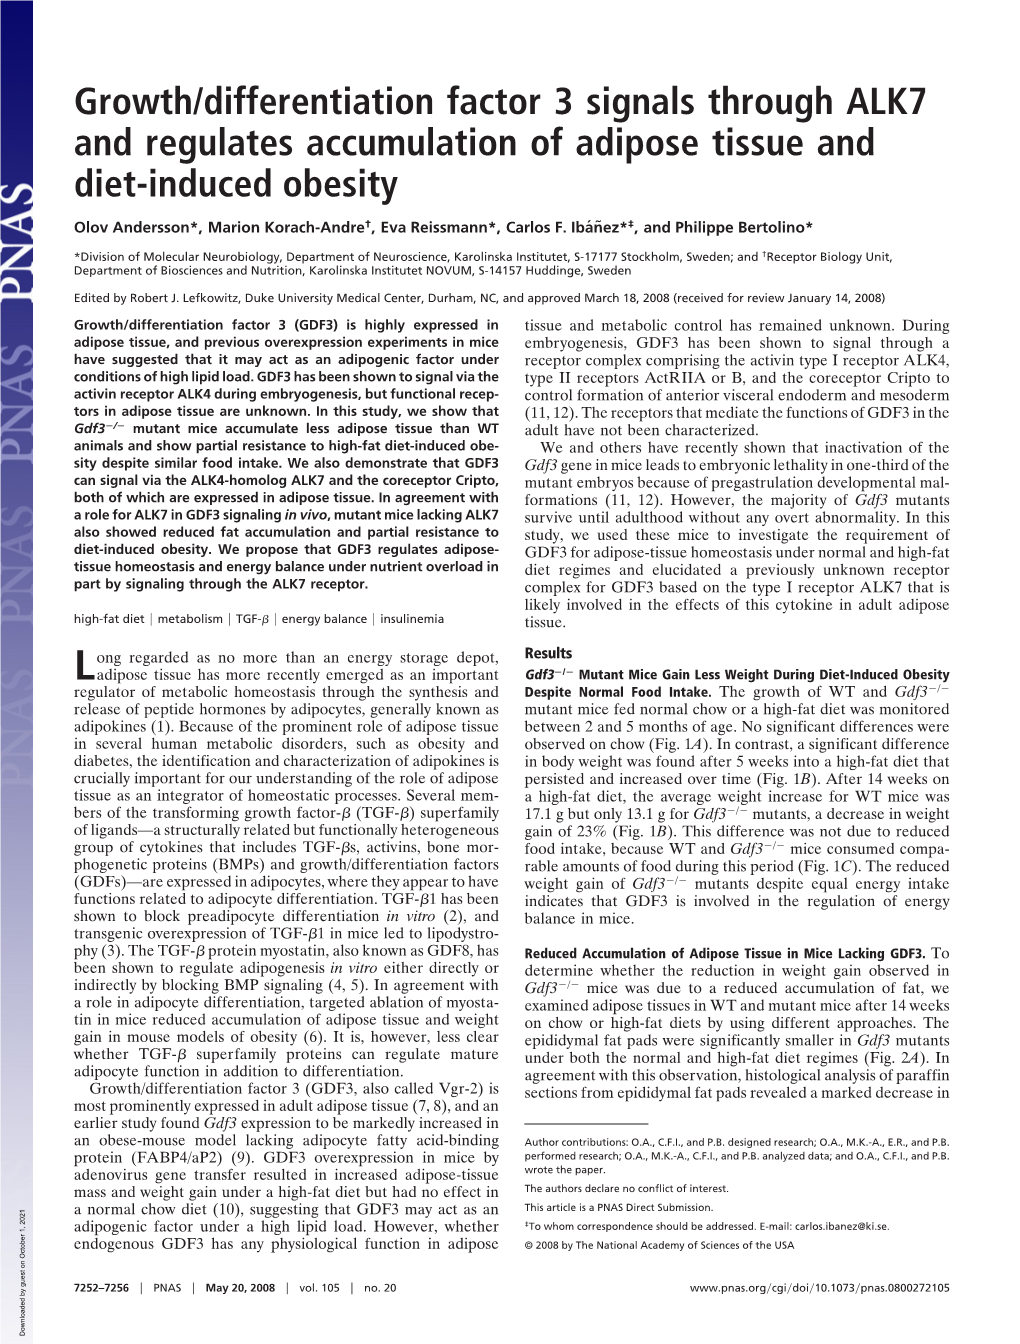 Growth/Differentiation Factor 3 Signals Through ALK7 and Regulates Accumulation of Adipose Tissue and Diet-Induced Obesity